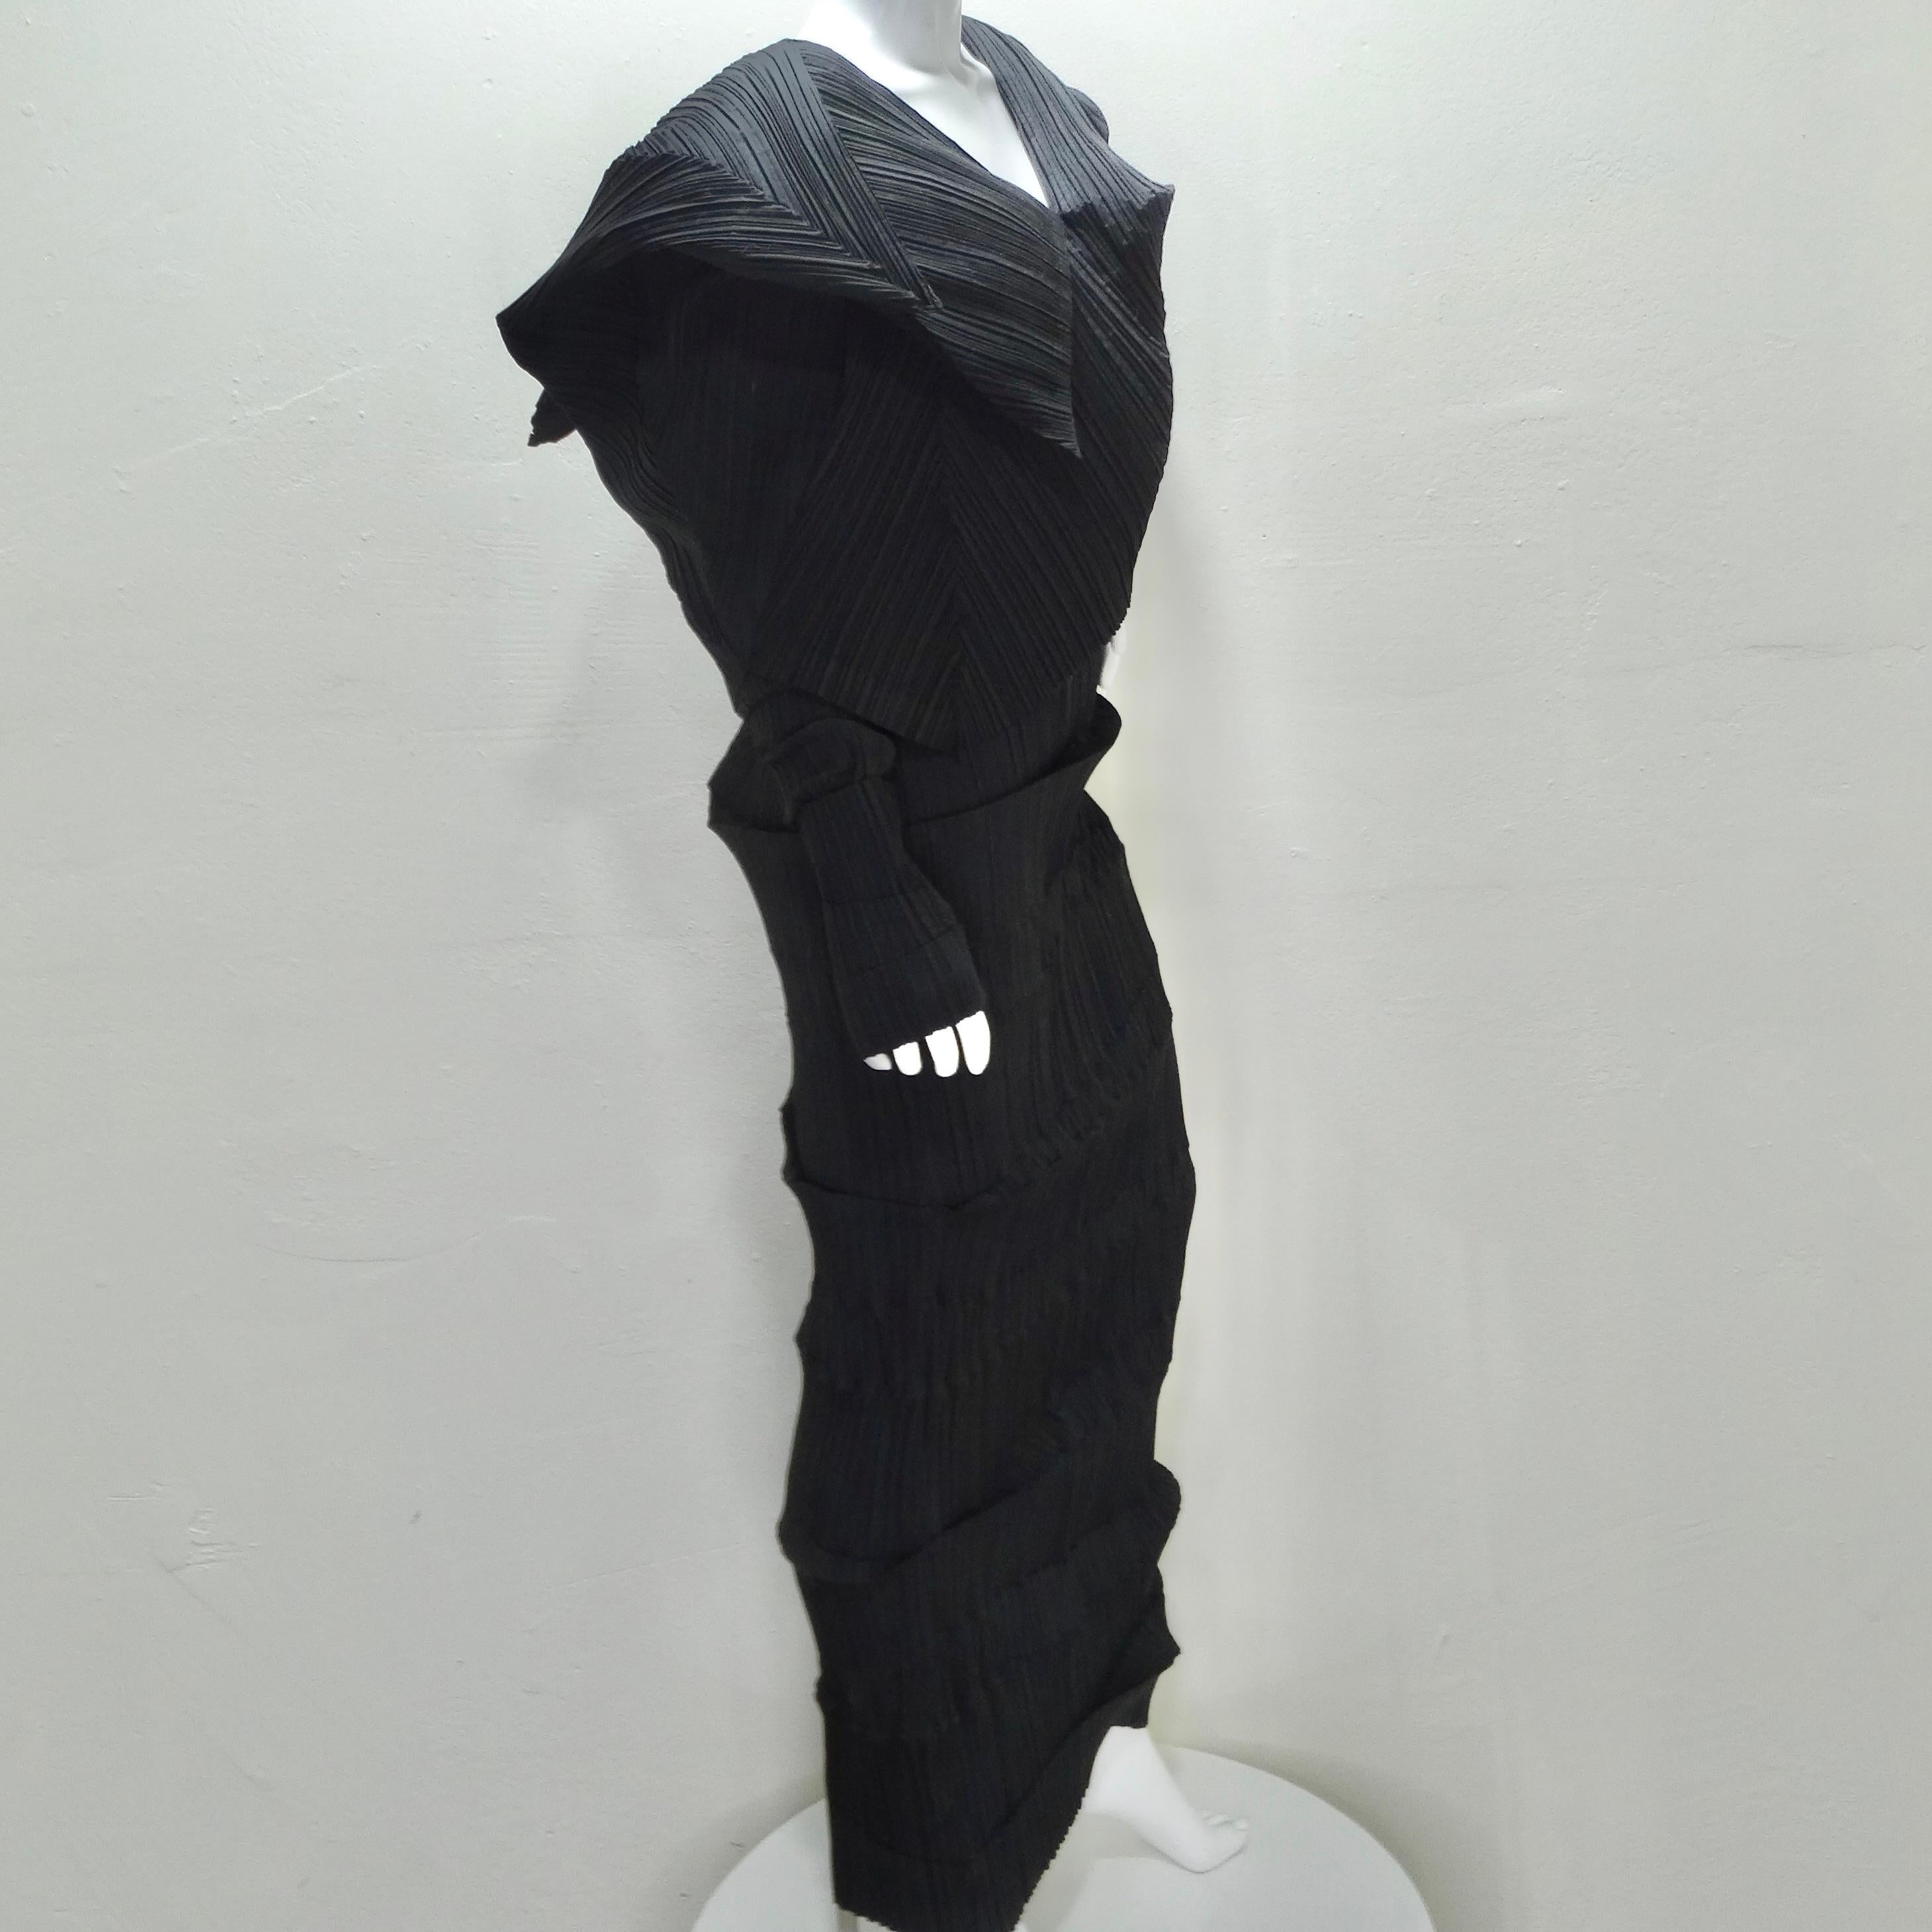 Issey Miyake 1989 Reverse Pleats Black Sculptural Museum Quality Dress For Sale 1